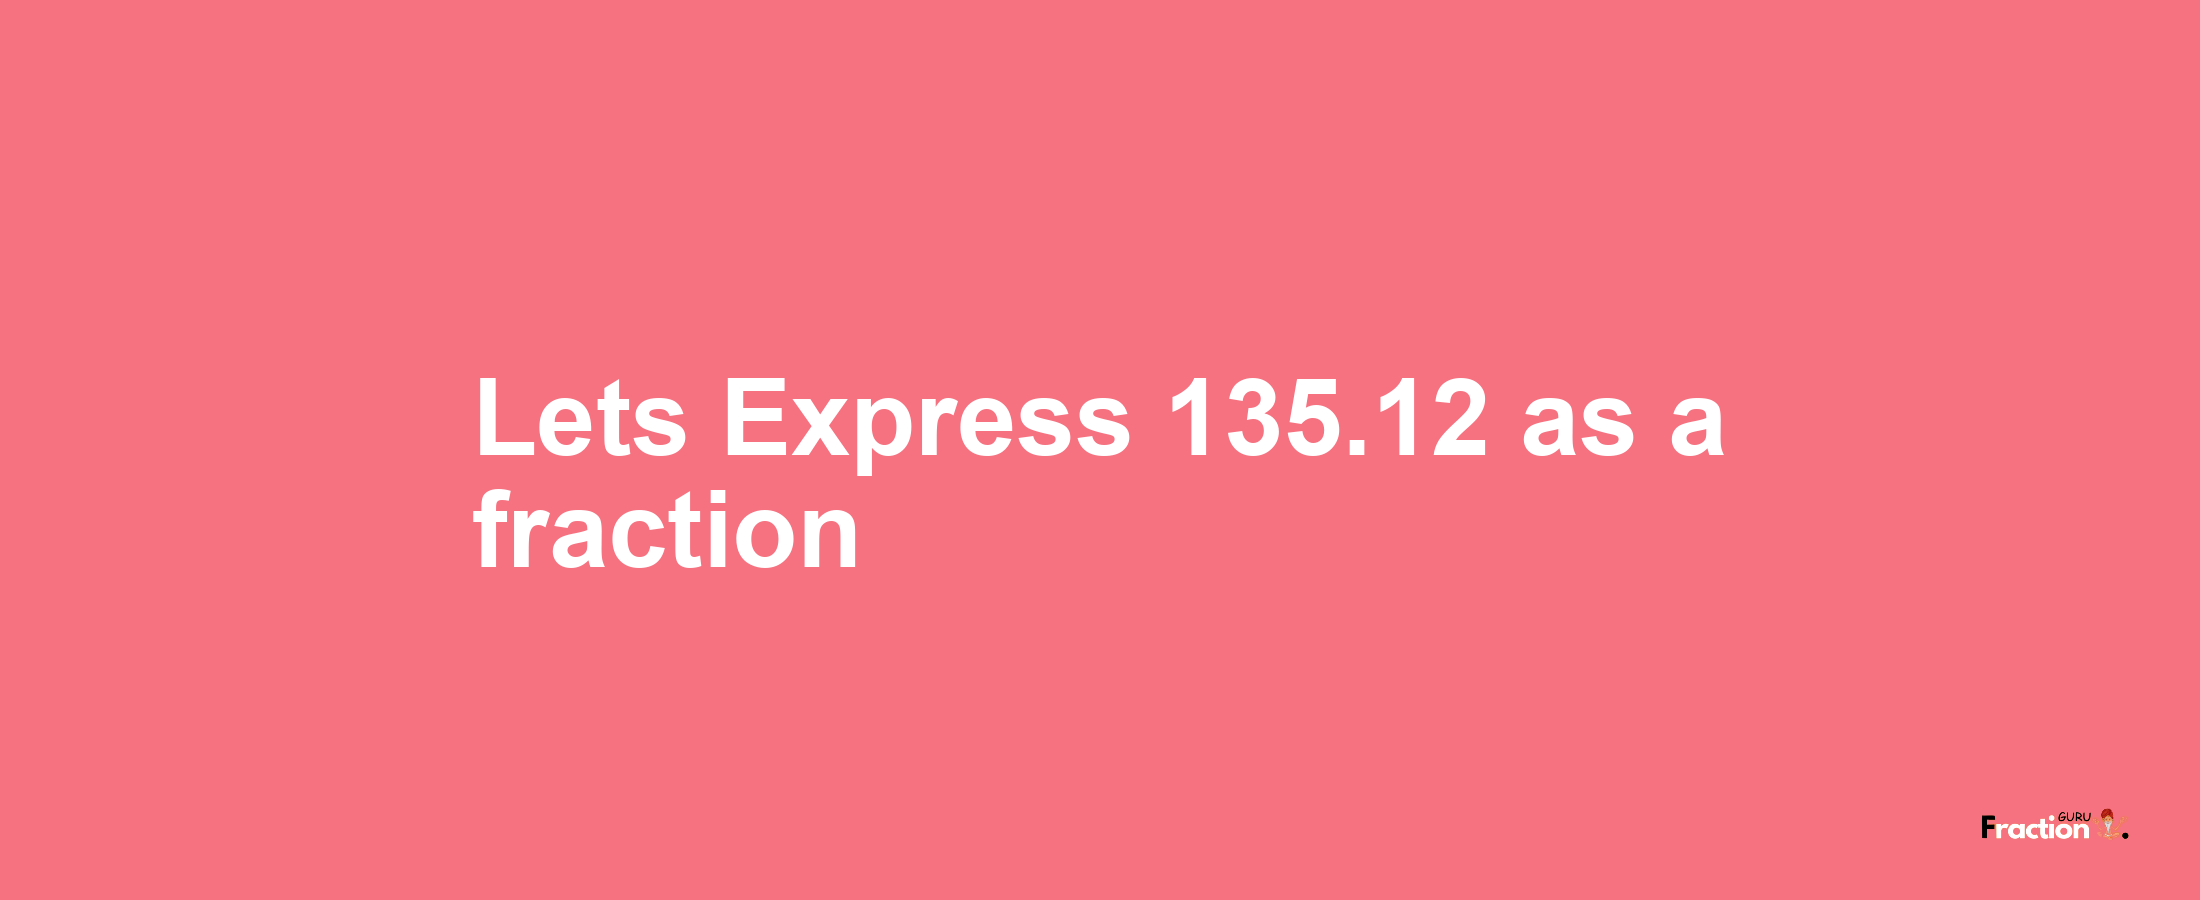 Lets Express 135.12 as afraction